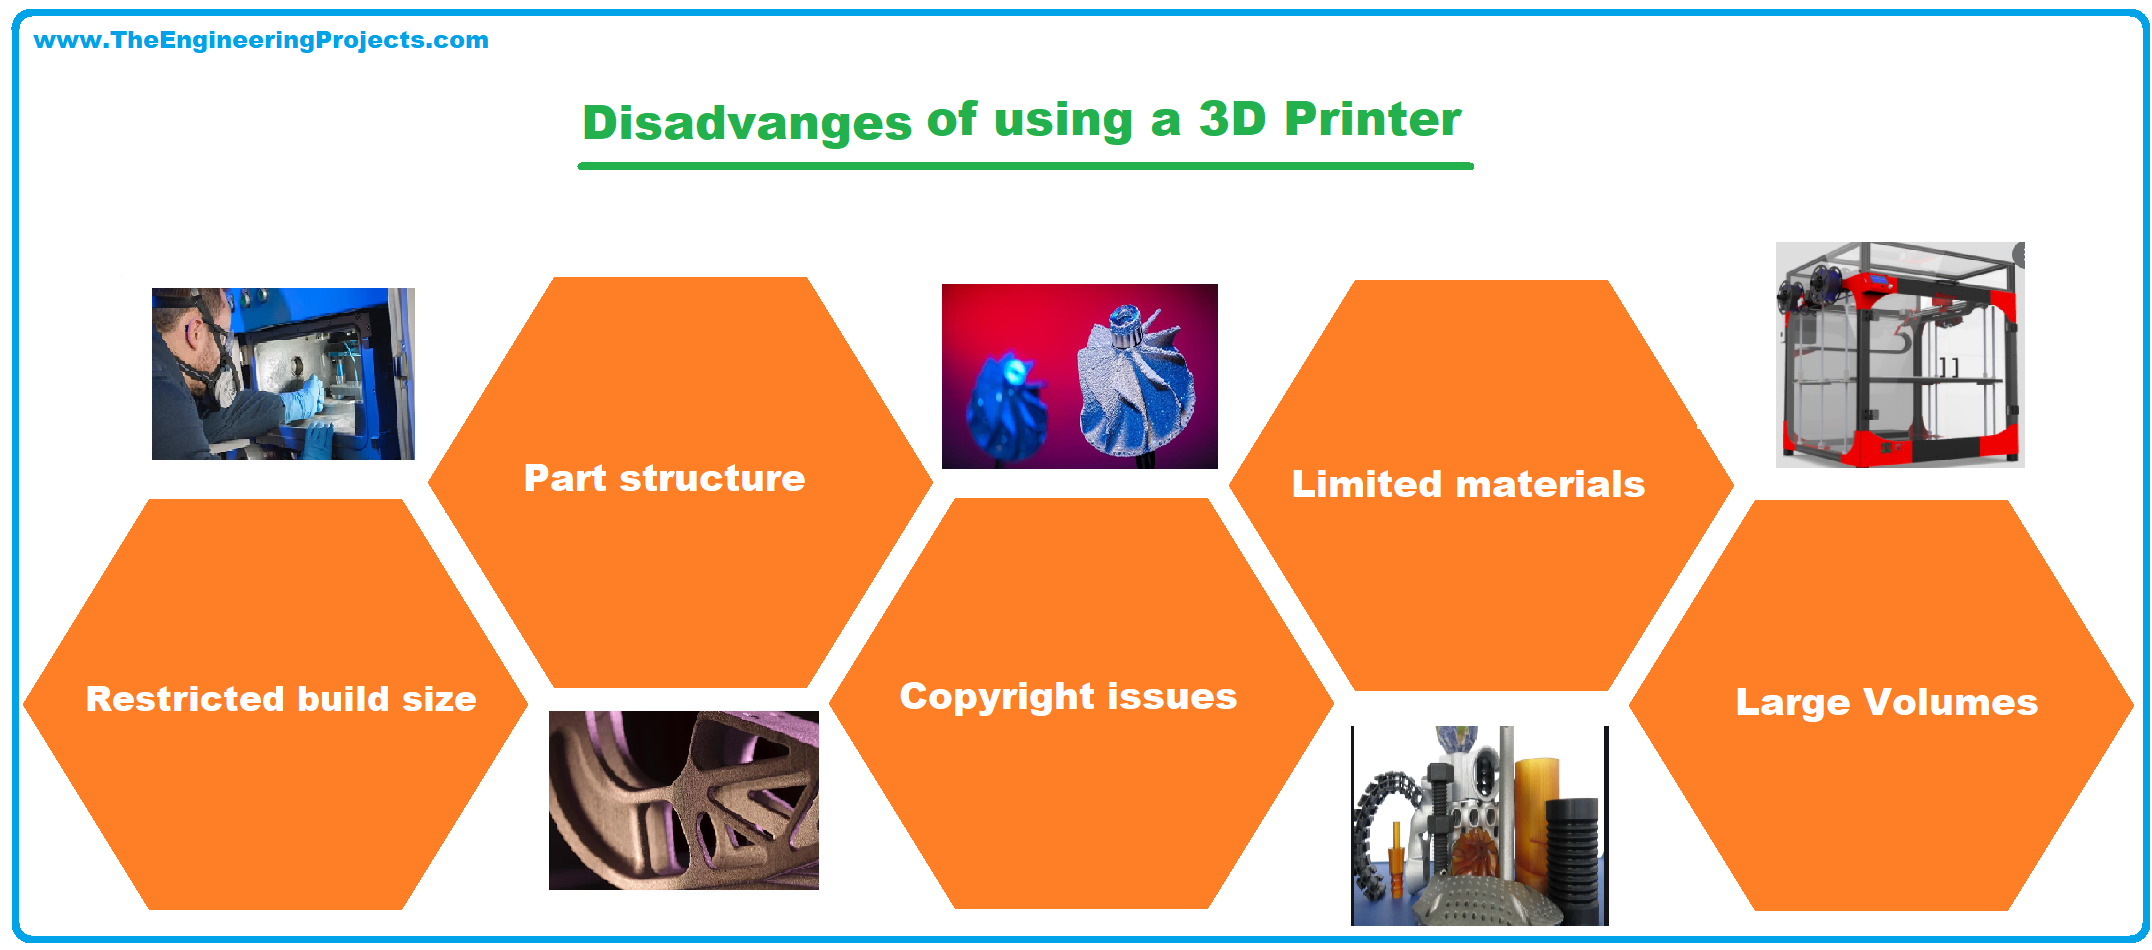 3D Printer, what is 3D Printer, working of 3D Printer, definition of 3D Printer, advantages of 3D Printer, disadvantages of 3D Printer, applications of 3D Printer, price of 3D Printer